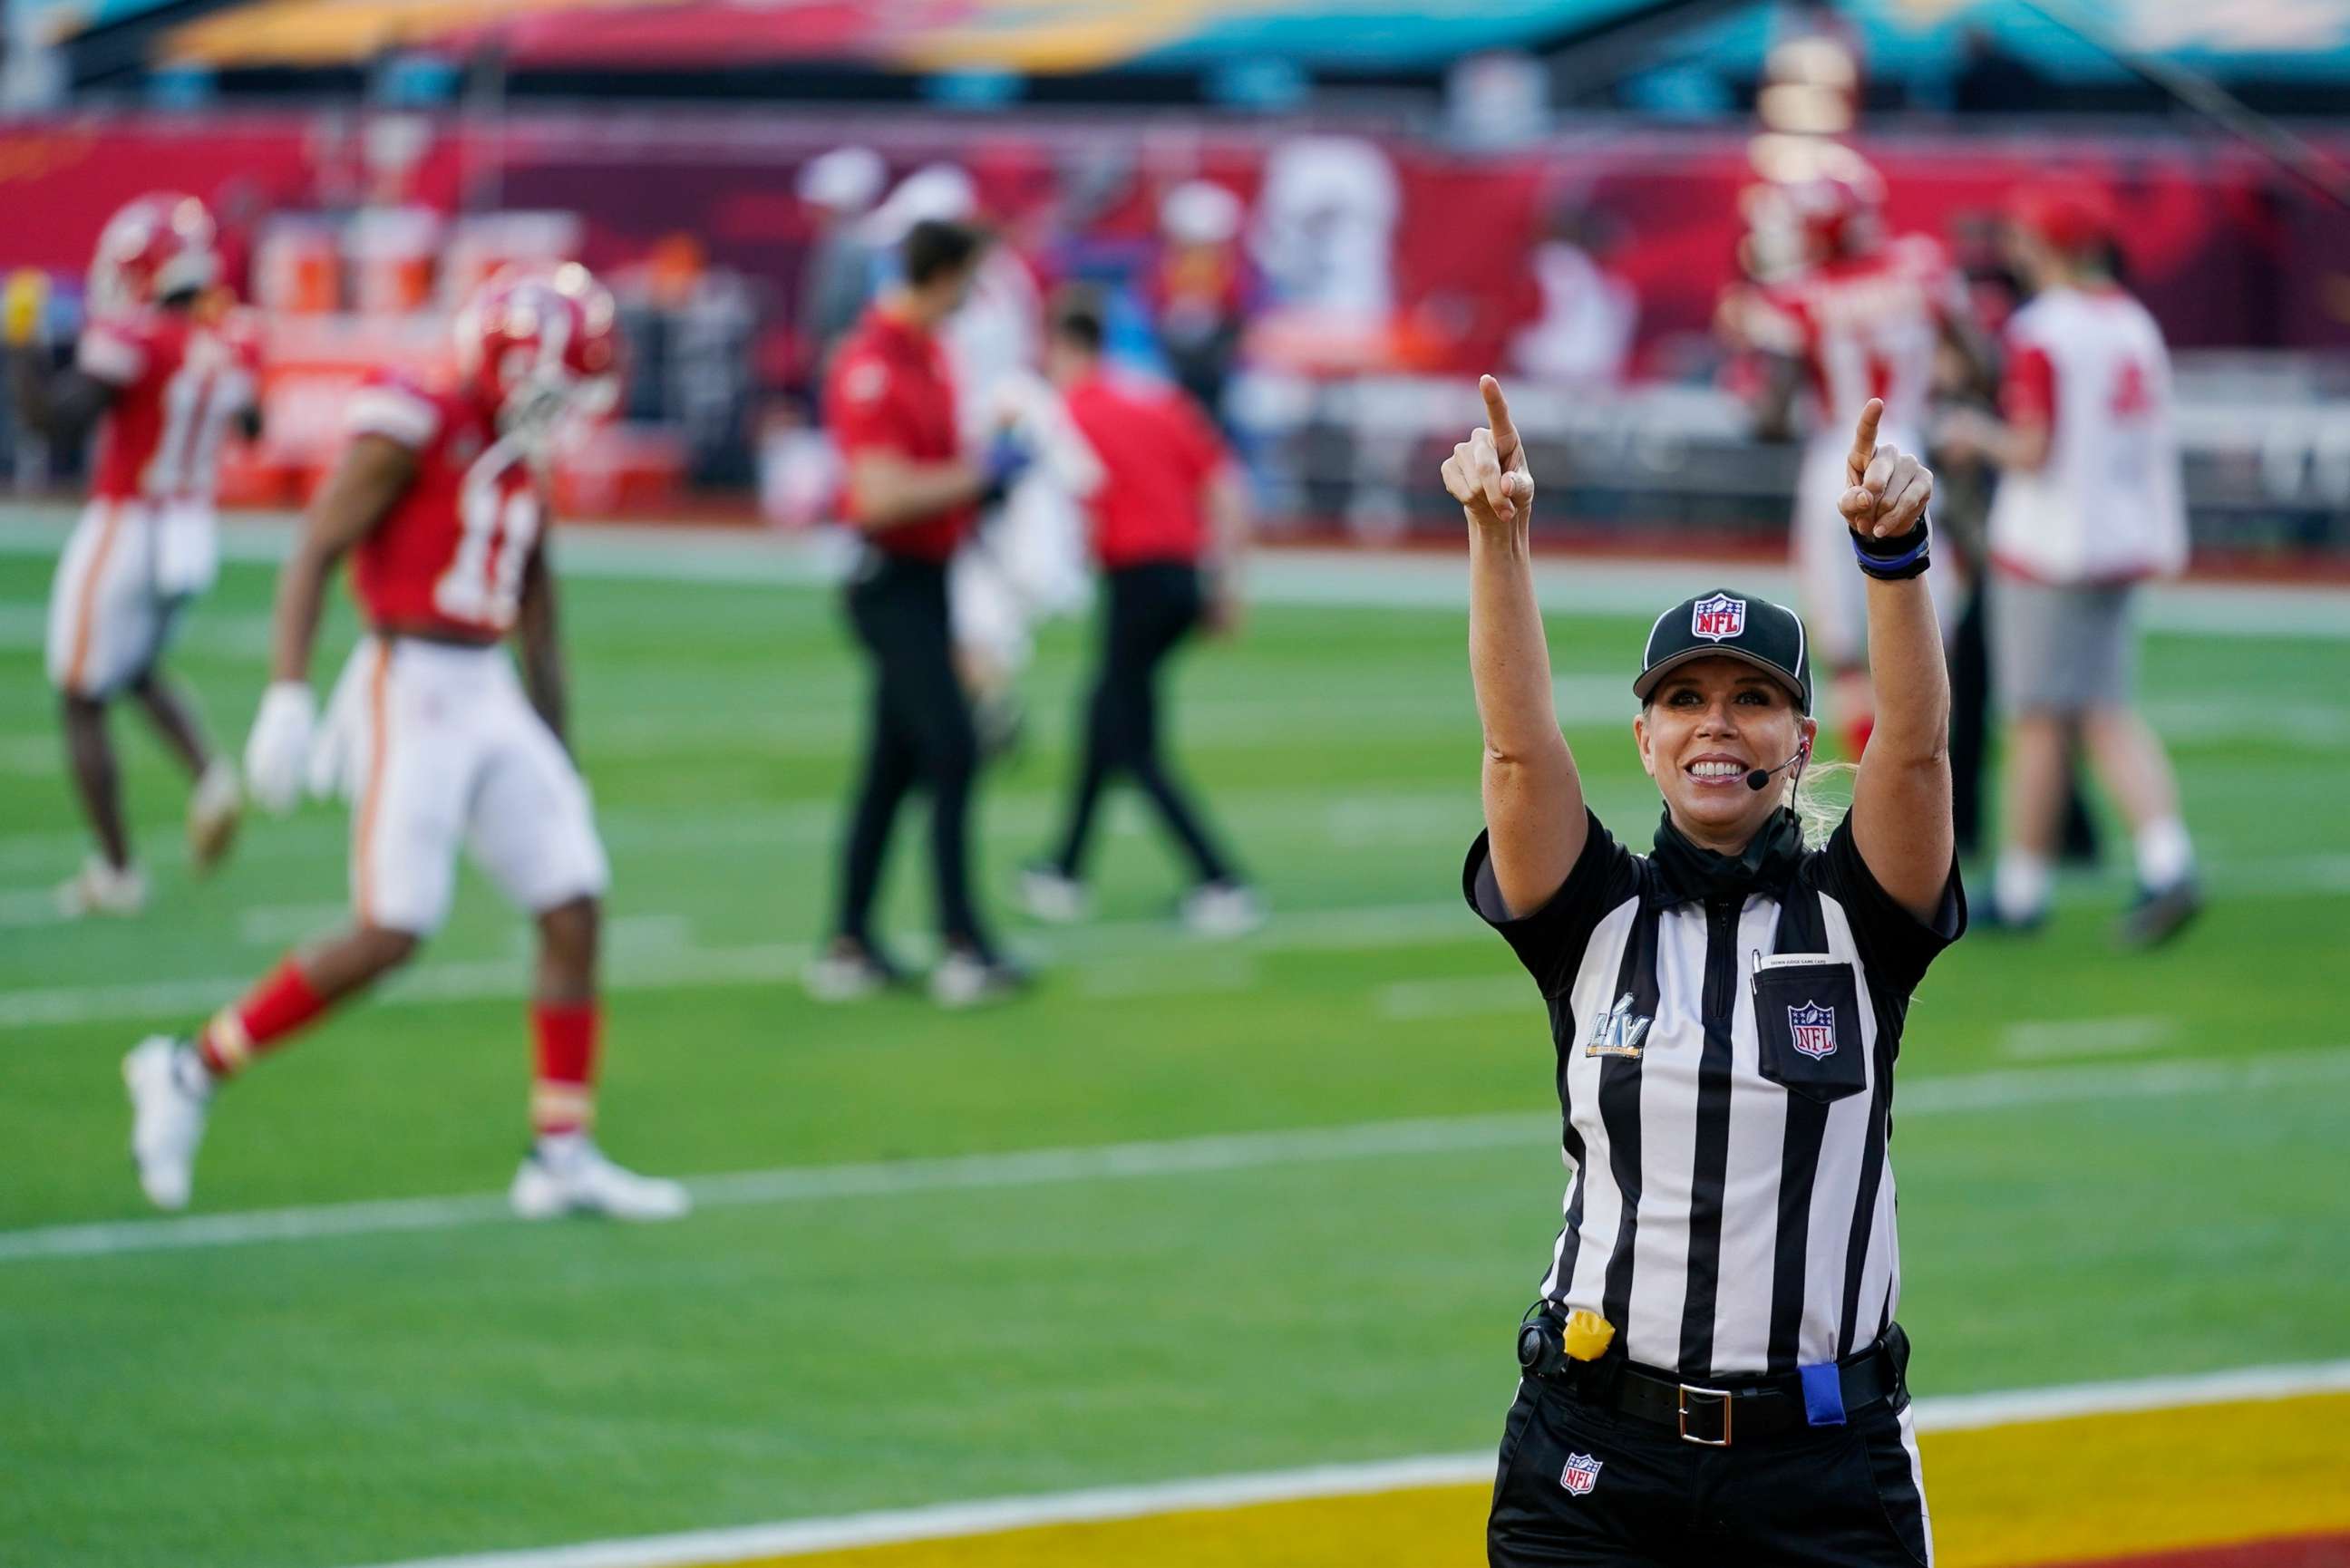 PHOTO: Down judge Sarah Thomas arrives before the NFL Super Bowl 55 game between the Kansas City Chiefs and Tampa Bay Buccaneers, Feb. 7, 2021, in Tampa, Fla.